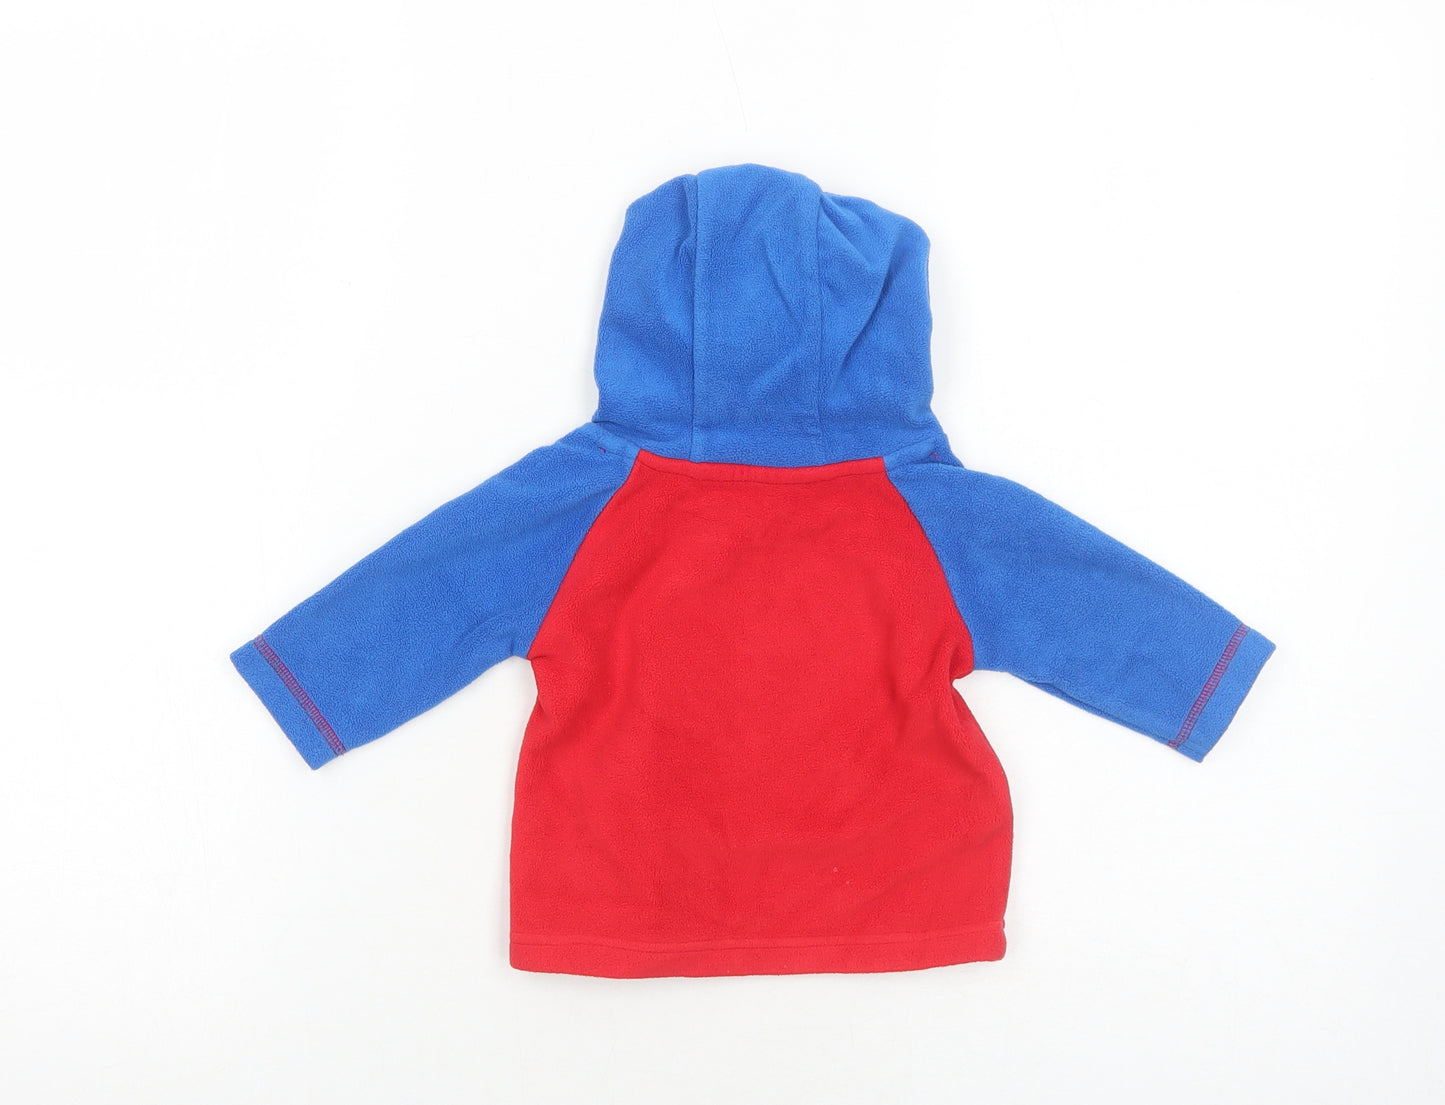 George Boys Red Colourblock Cotton Pullover Jumper Size 3-6 Months Pullover - Spider-Man